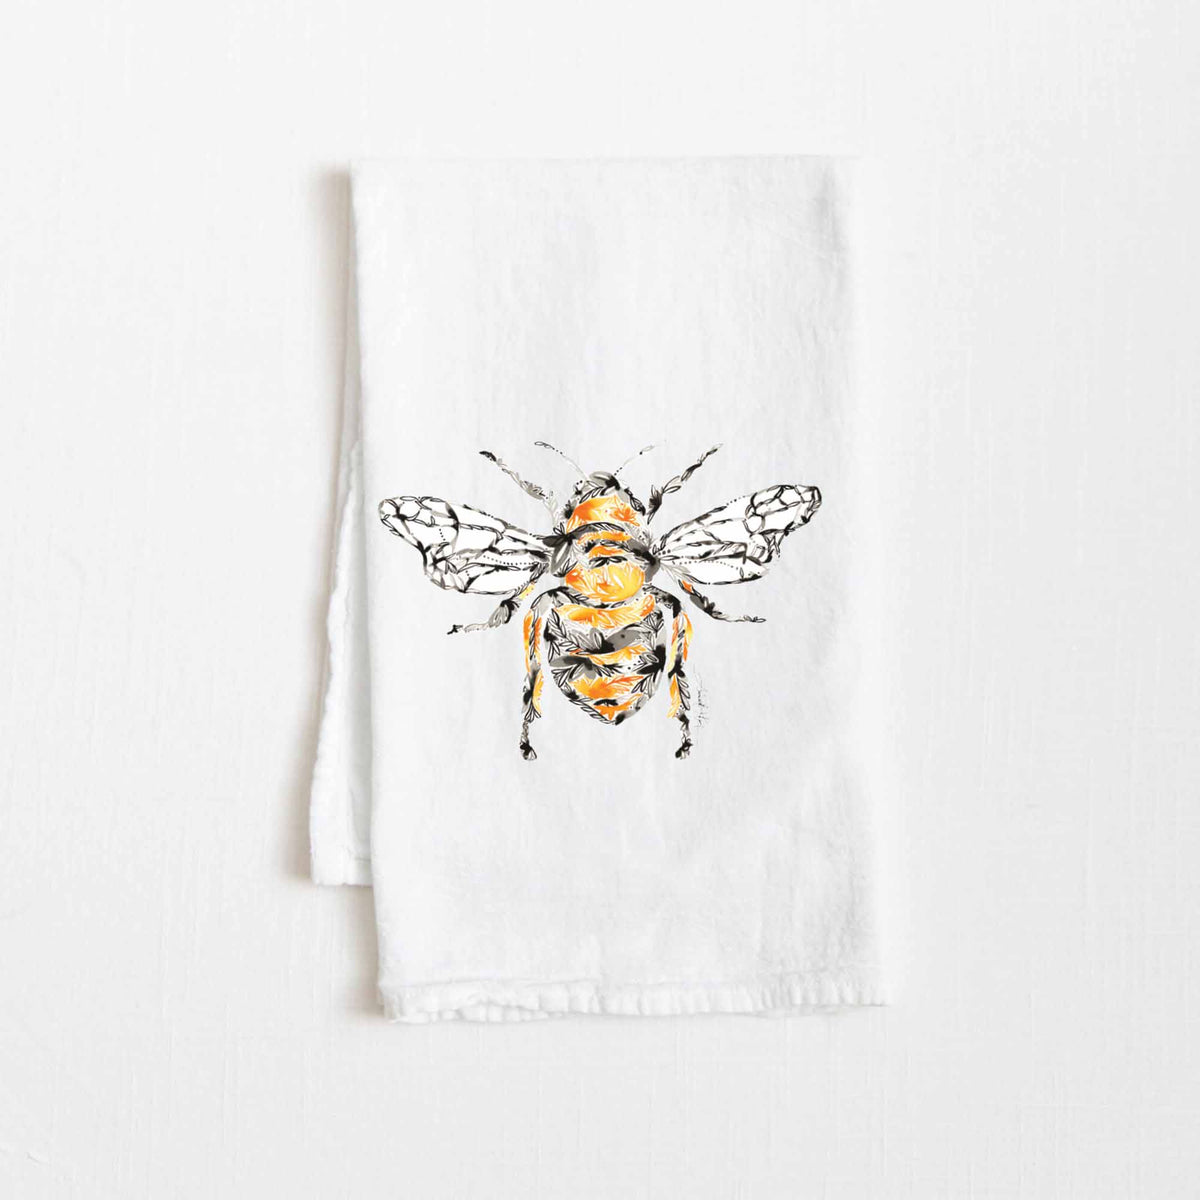 Bee Embroidered Towel Bee Kitchen Decor Cute Kitchen Towels Hostess Gift